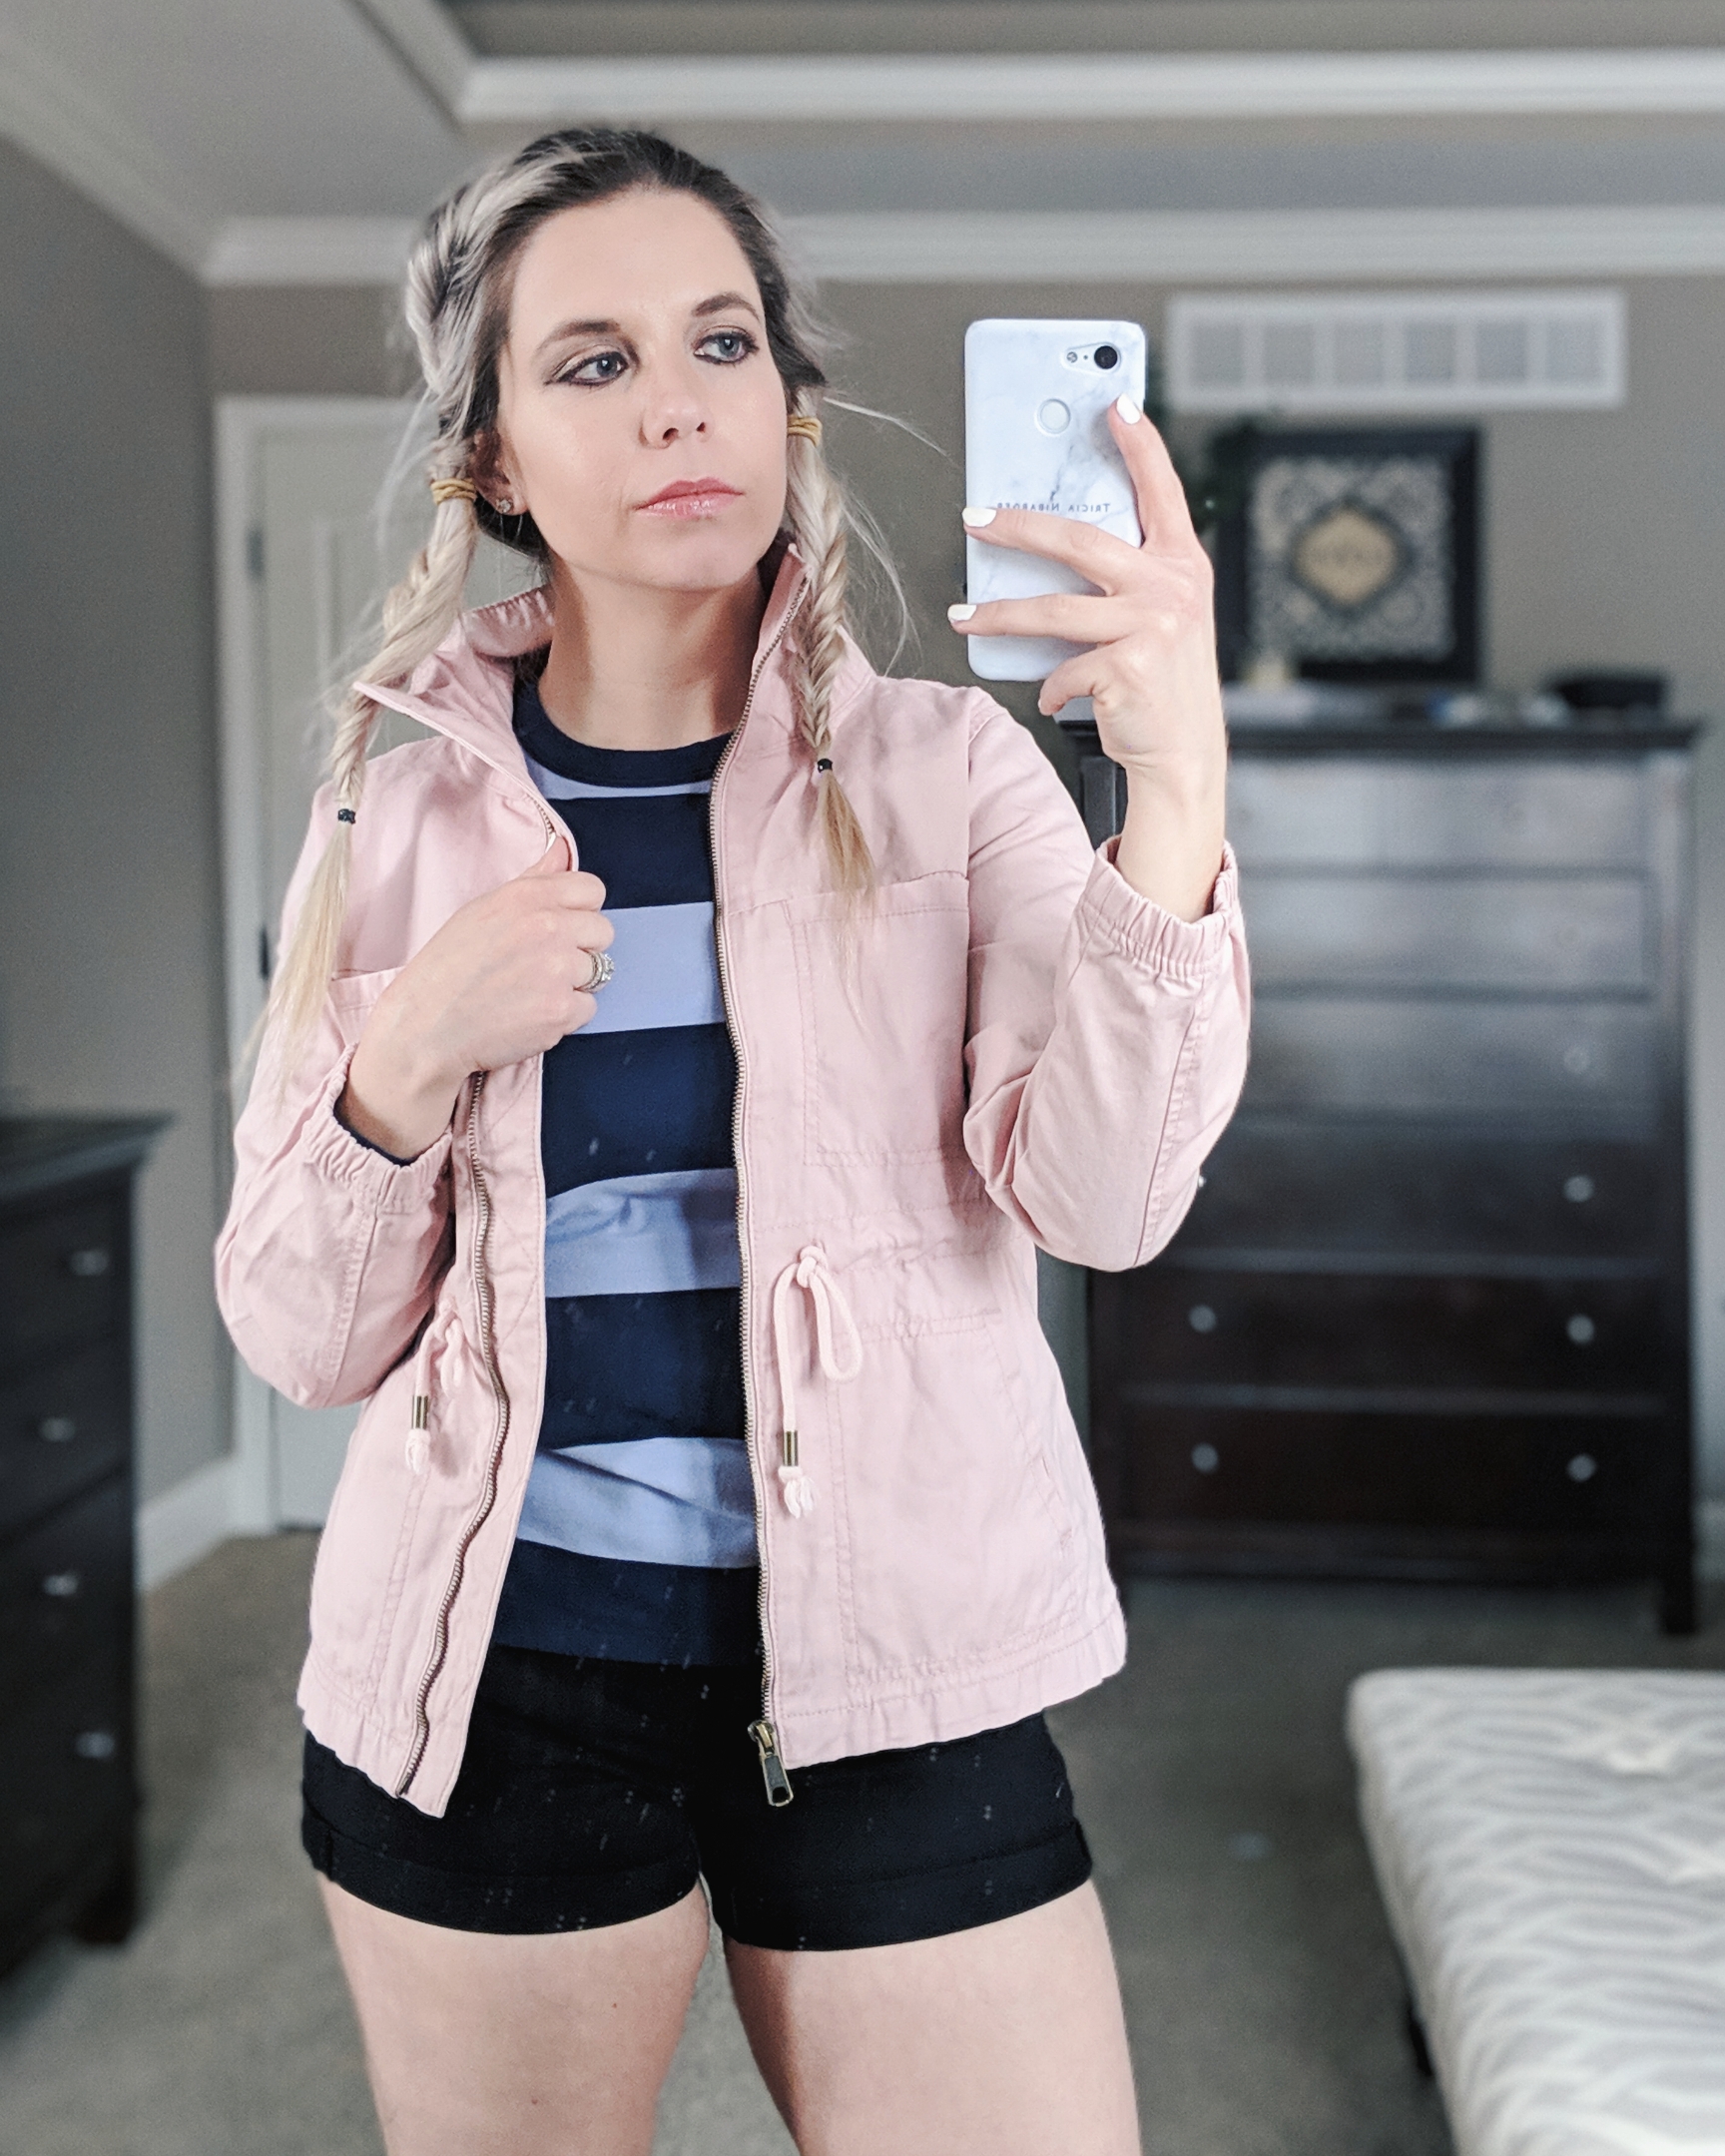 Old Navy Try On Haul Spring 2019: The best pieces from Old Navy to refresh your closet for Spring 2019! Fashion blogger Tricia Nibarger of COVET by tricia showcases the cutest Old Navy Spring 2019 styles. This Old Navy try on haul includes dresses, jackets, tops, shorts, workout wear, and more! #oldnavy #liketkit #tryon #haul